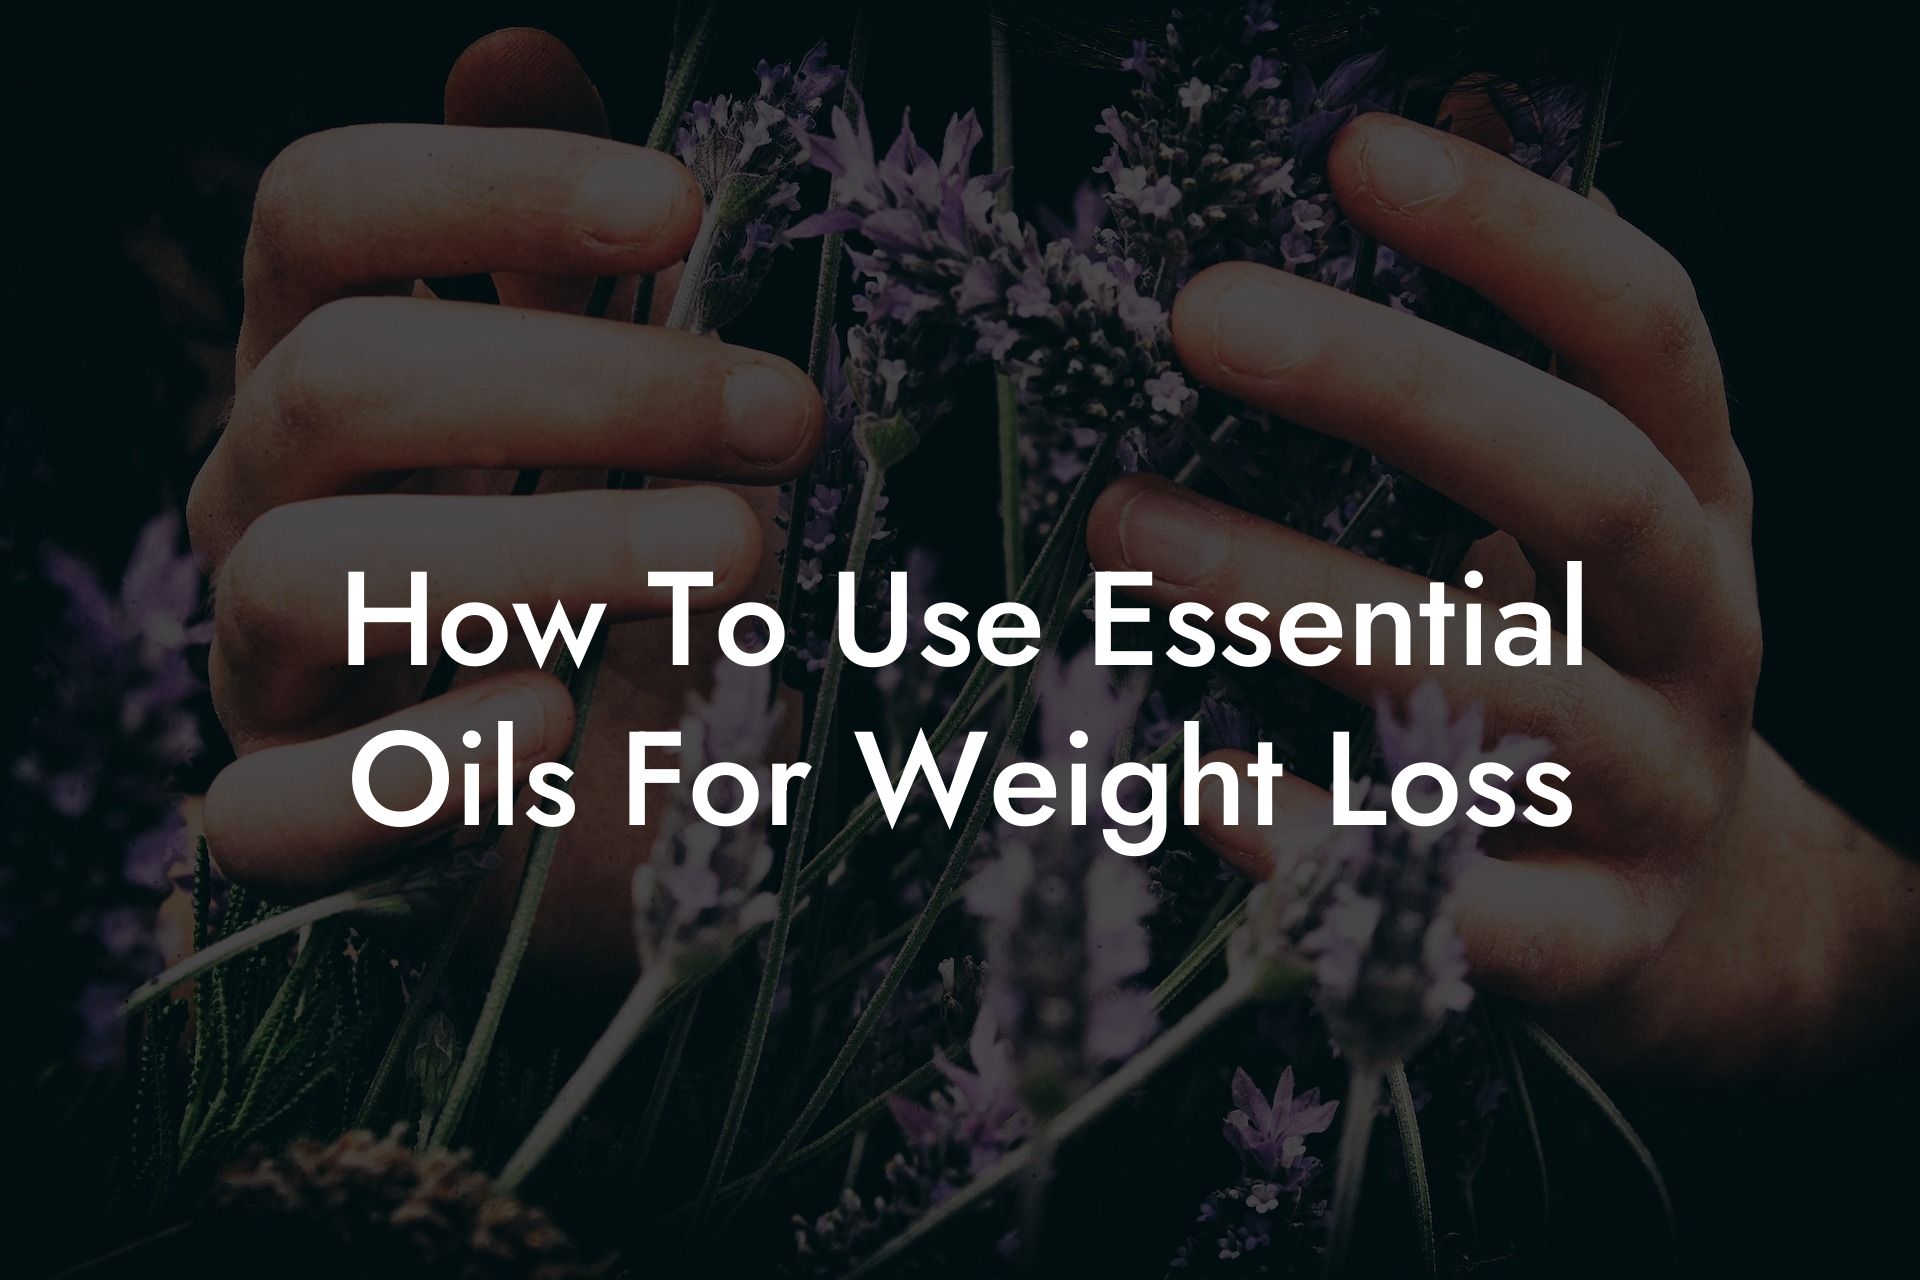 How To Use Essential Oils For Weight Loss